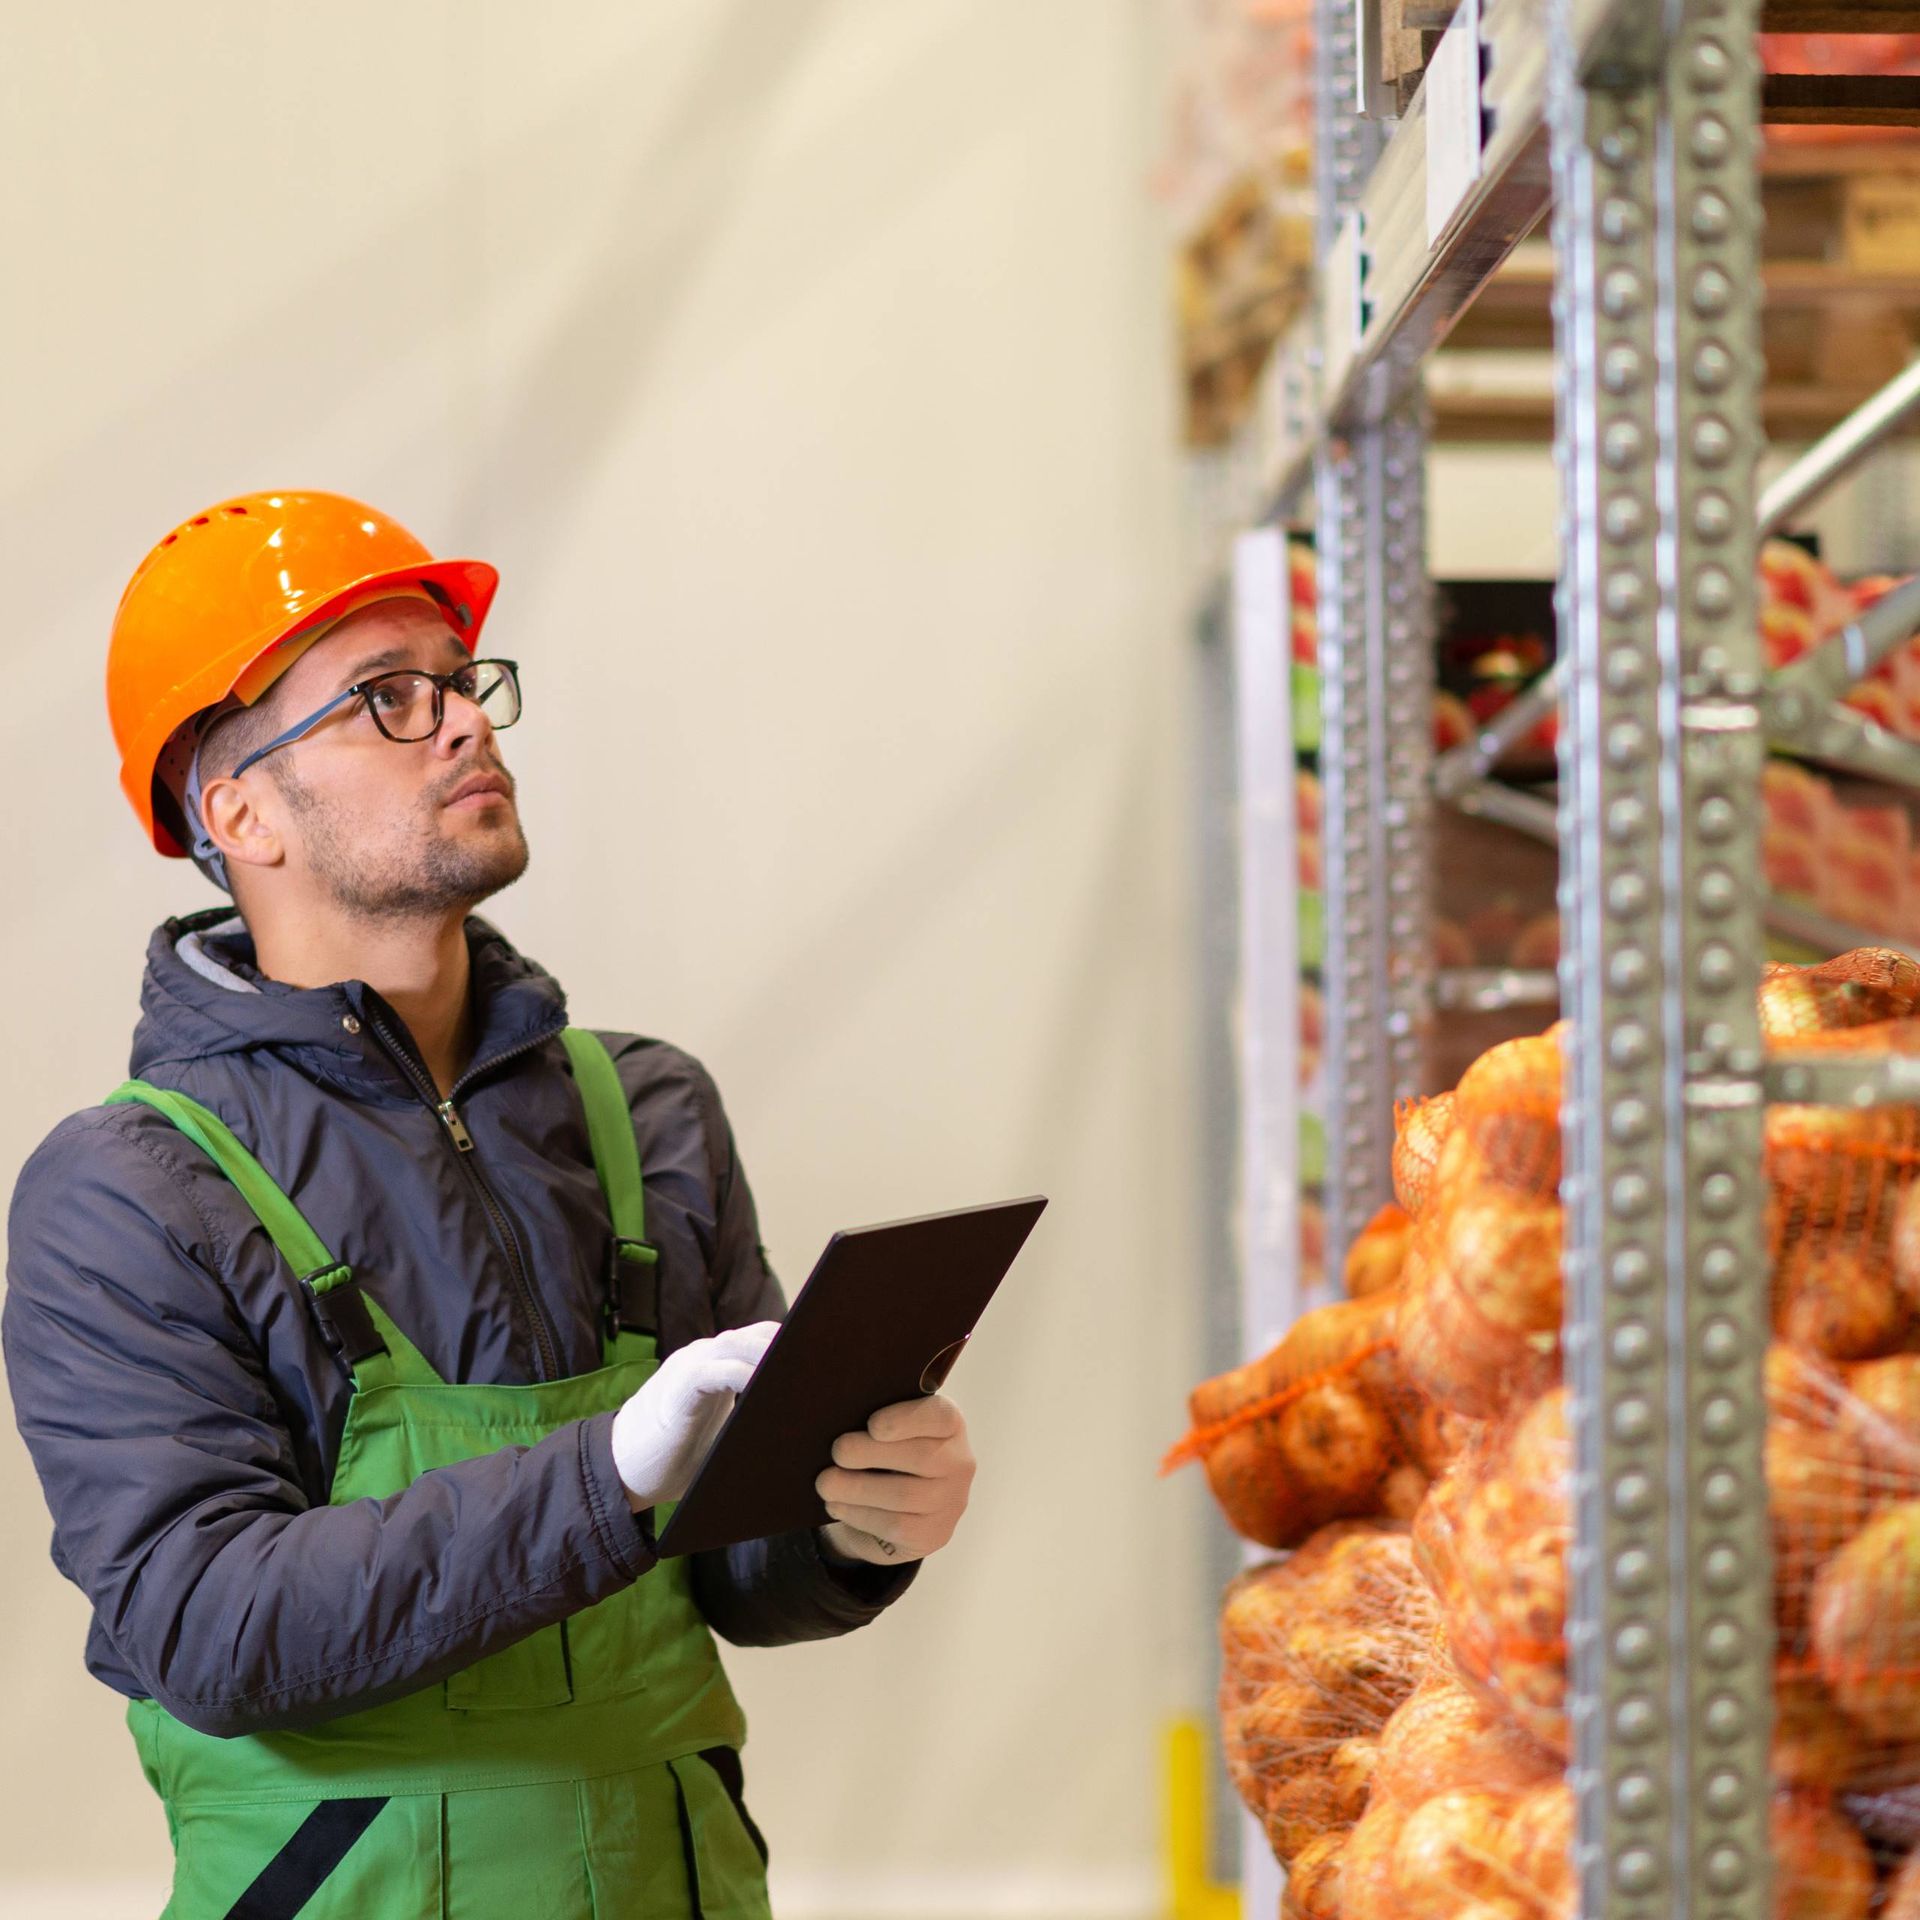 Image of a certification body auditor inspecting a vegetable storage facility